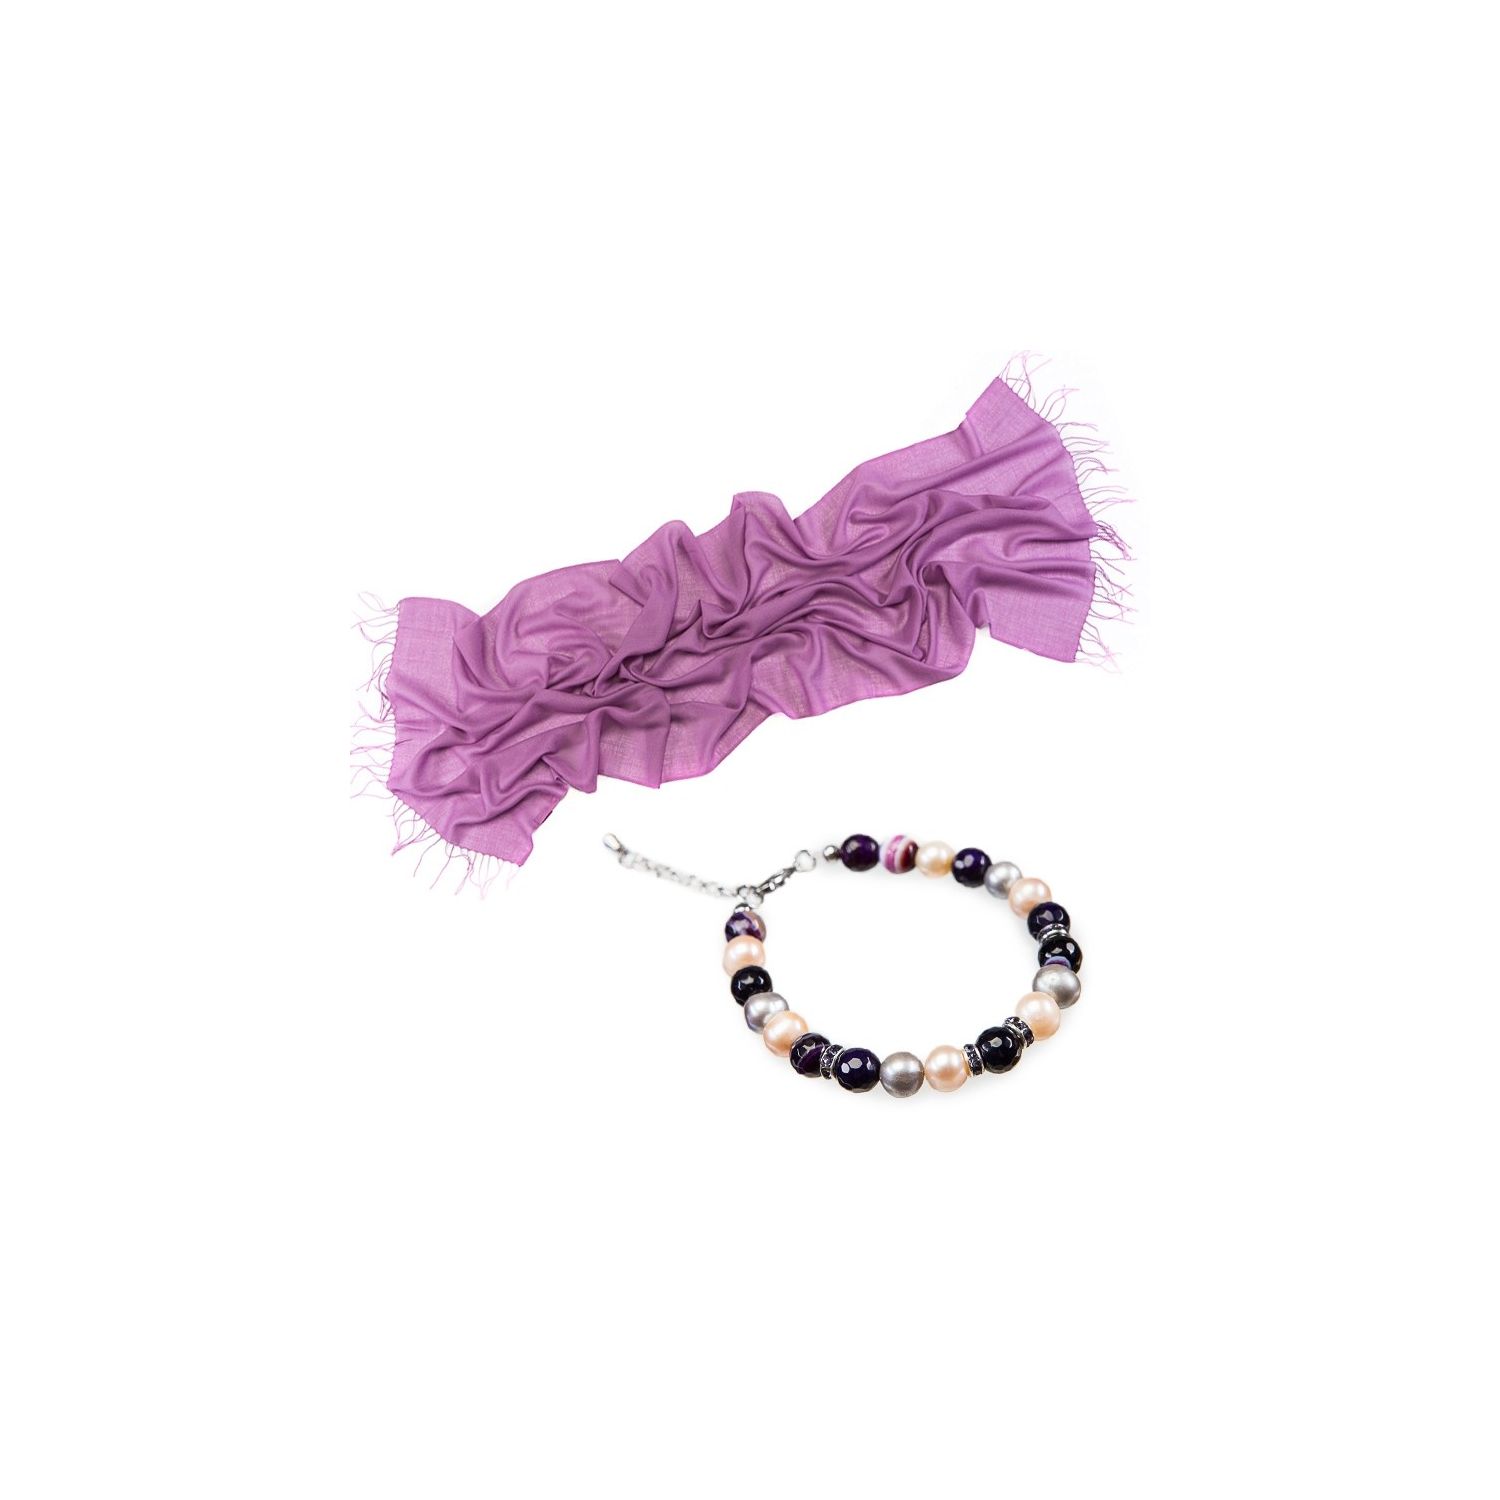 GIFT: Mila Schon wool scarf lilac and purple lace agate and pearls bracelet